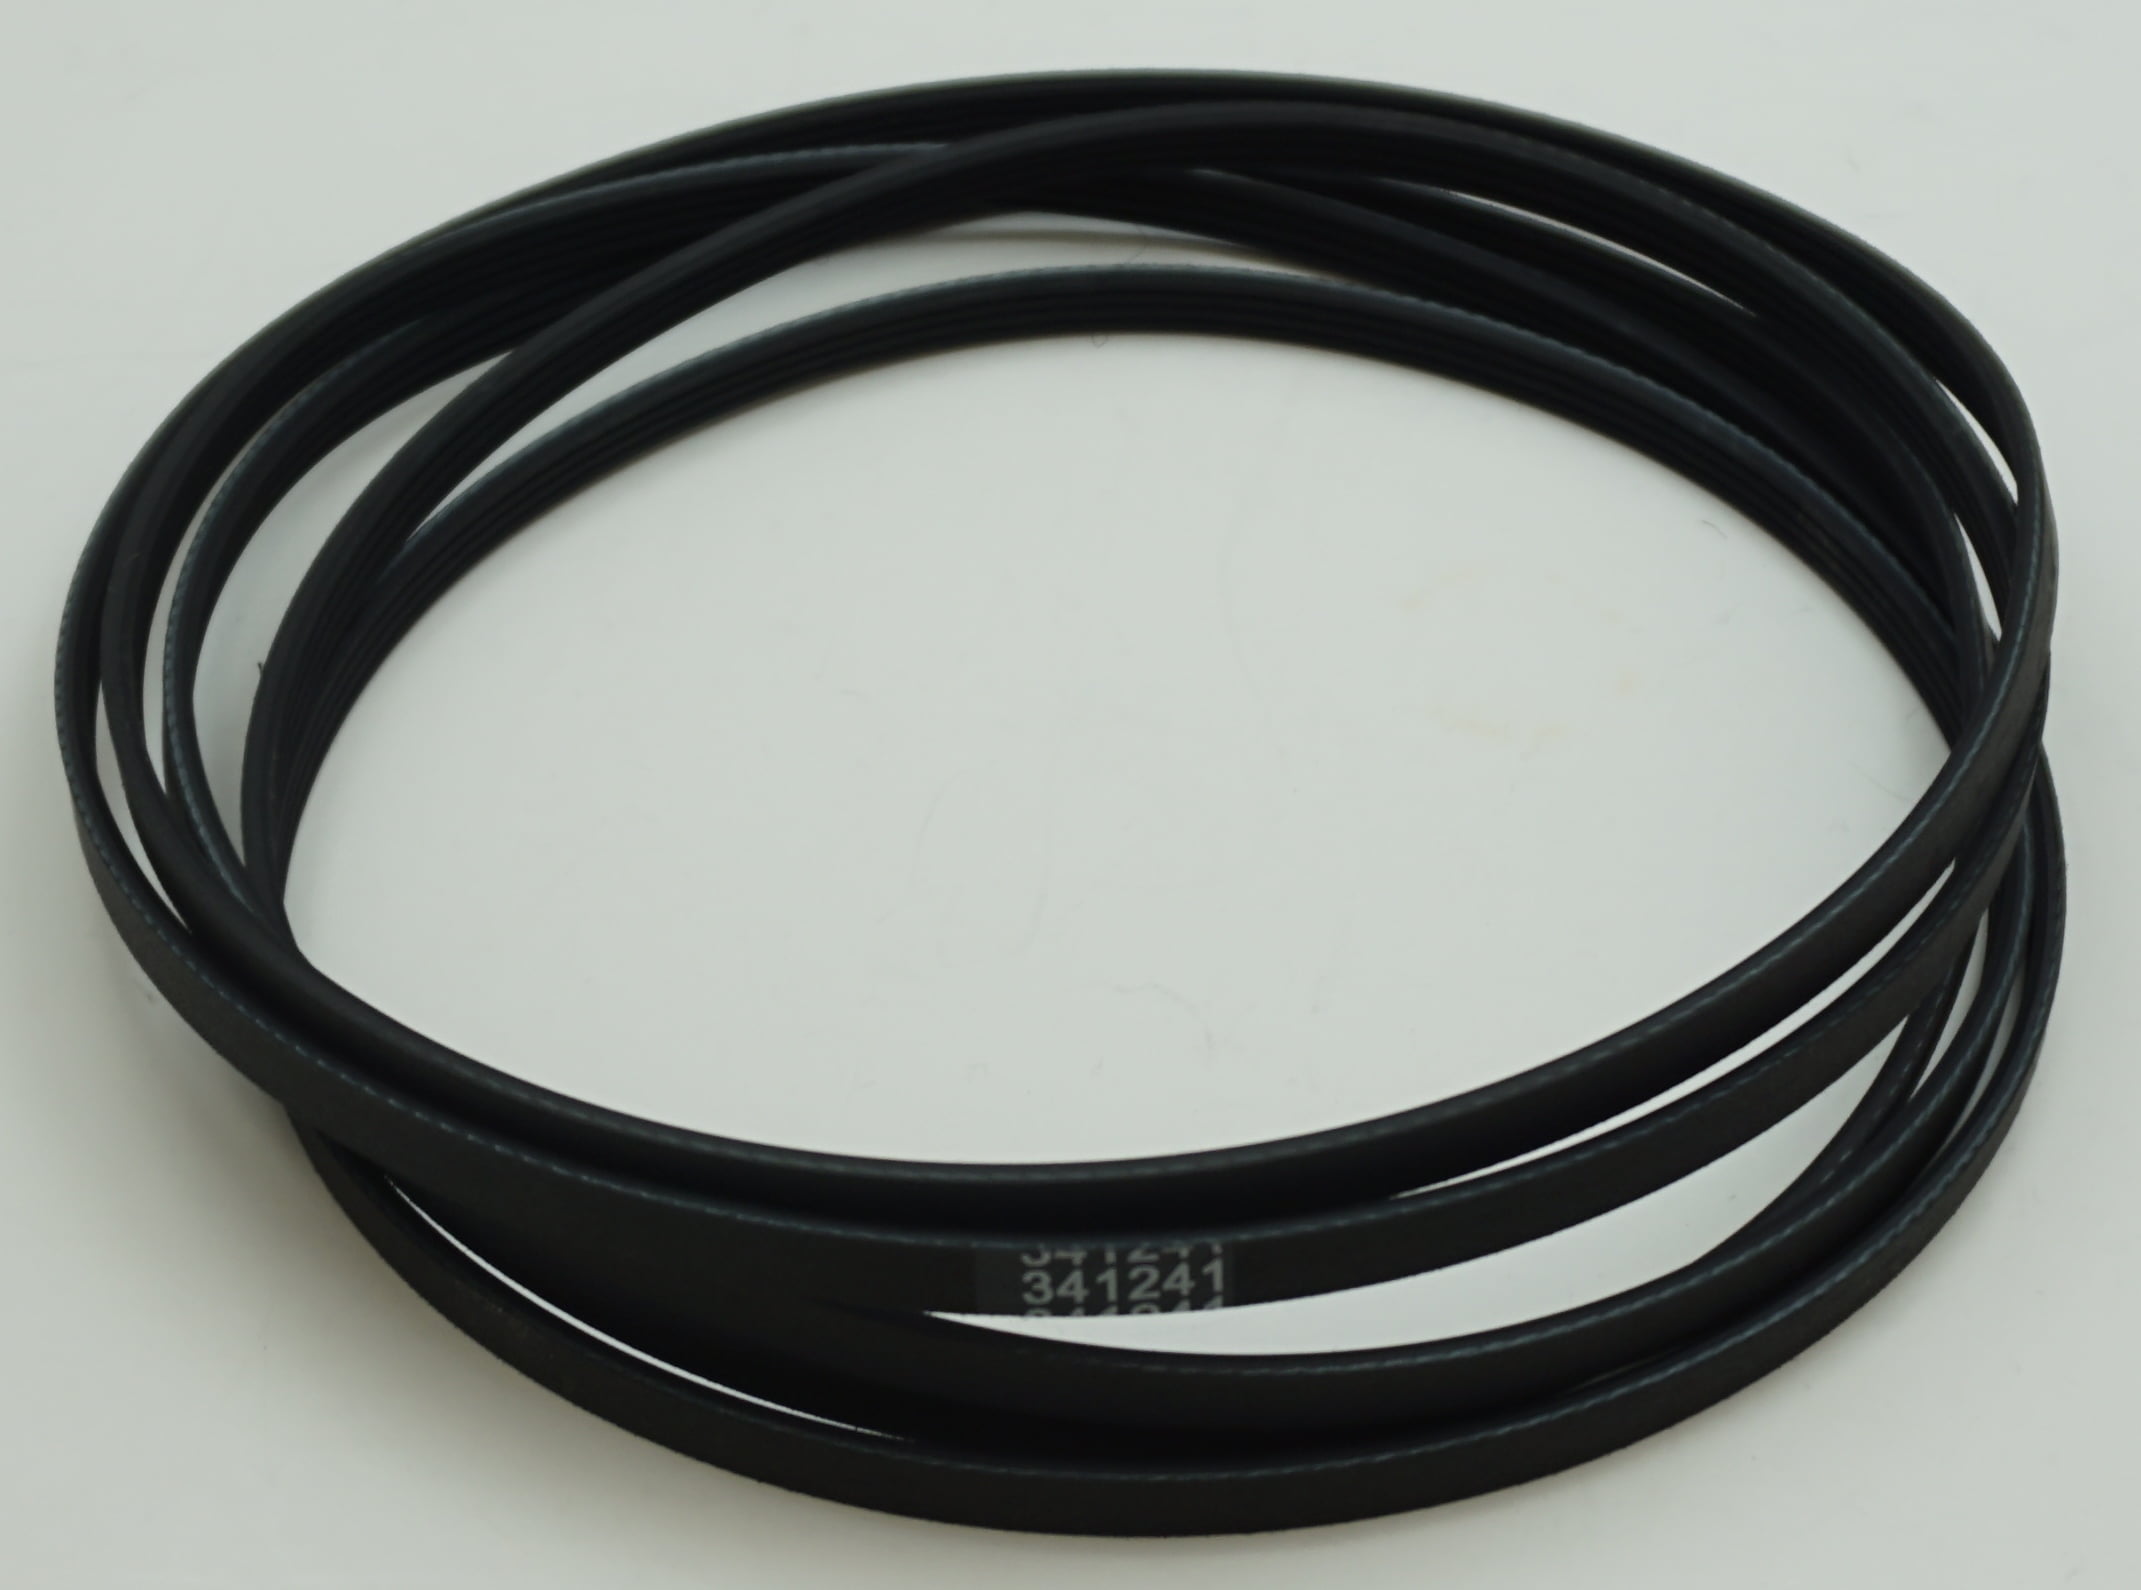 Black Aftermarket Replacement for Whirlpool 341241 Dryer Drum Belt 